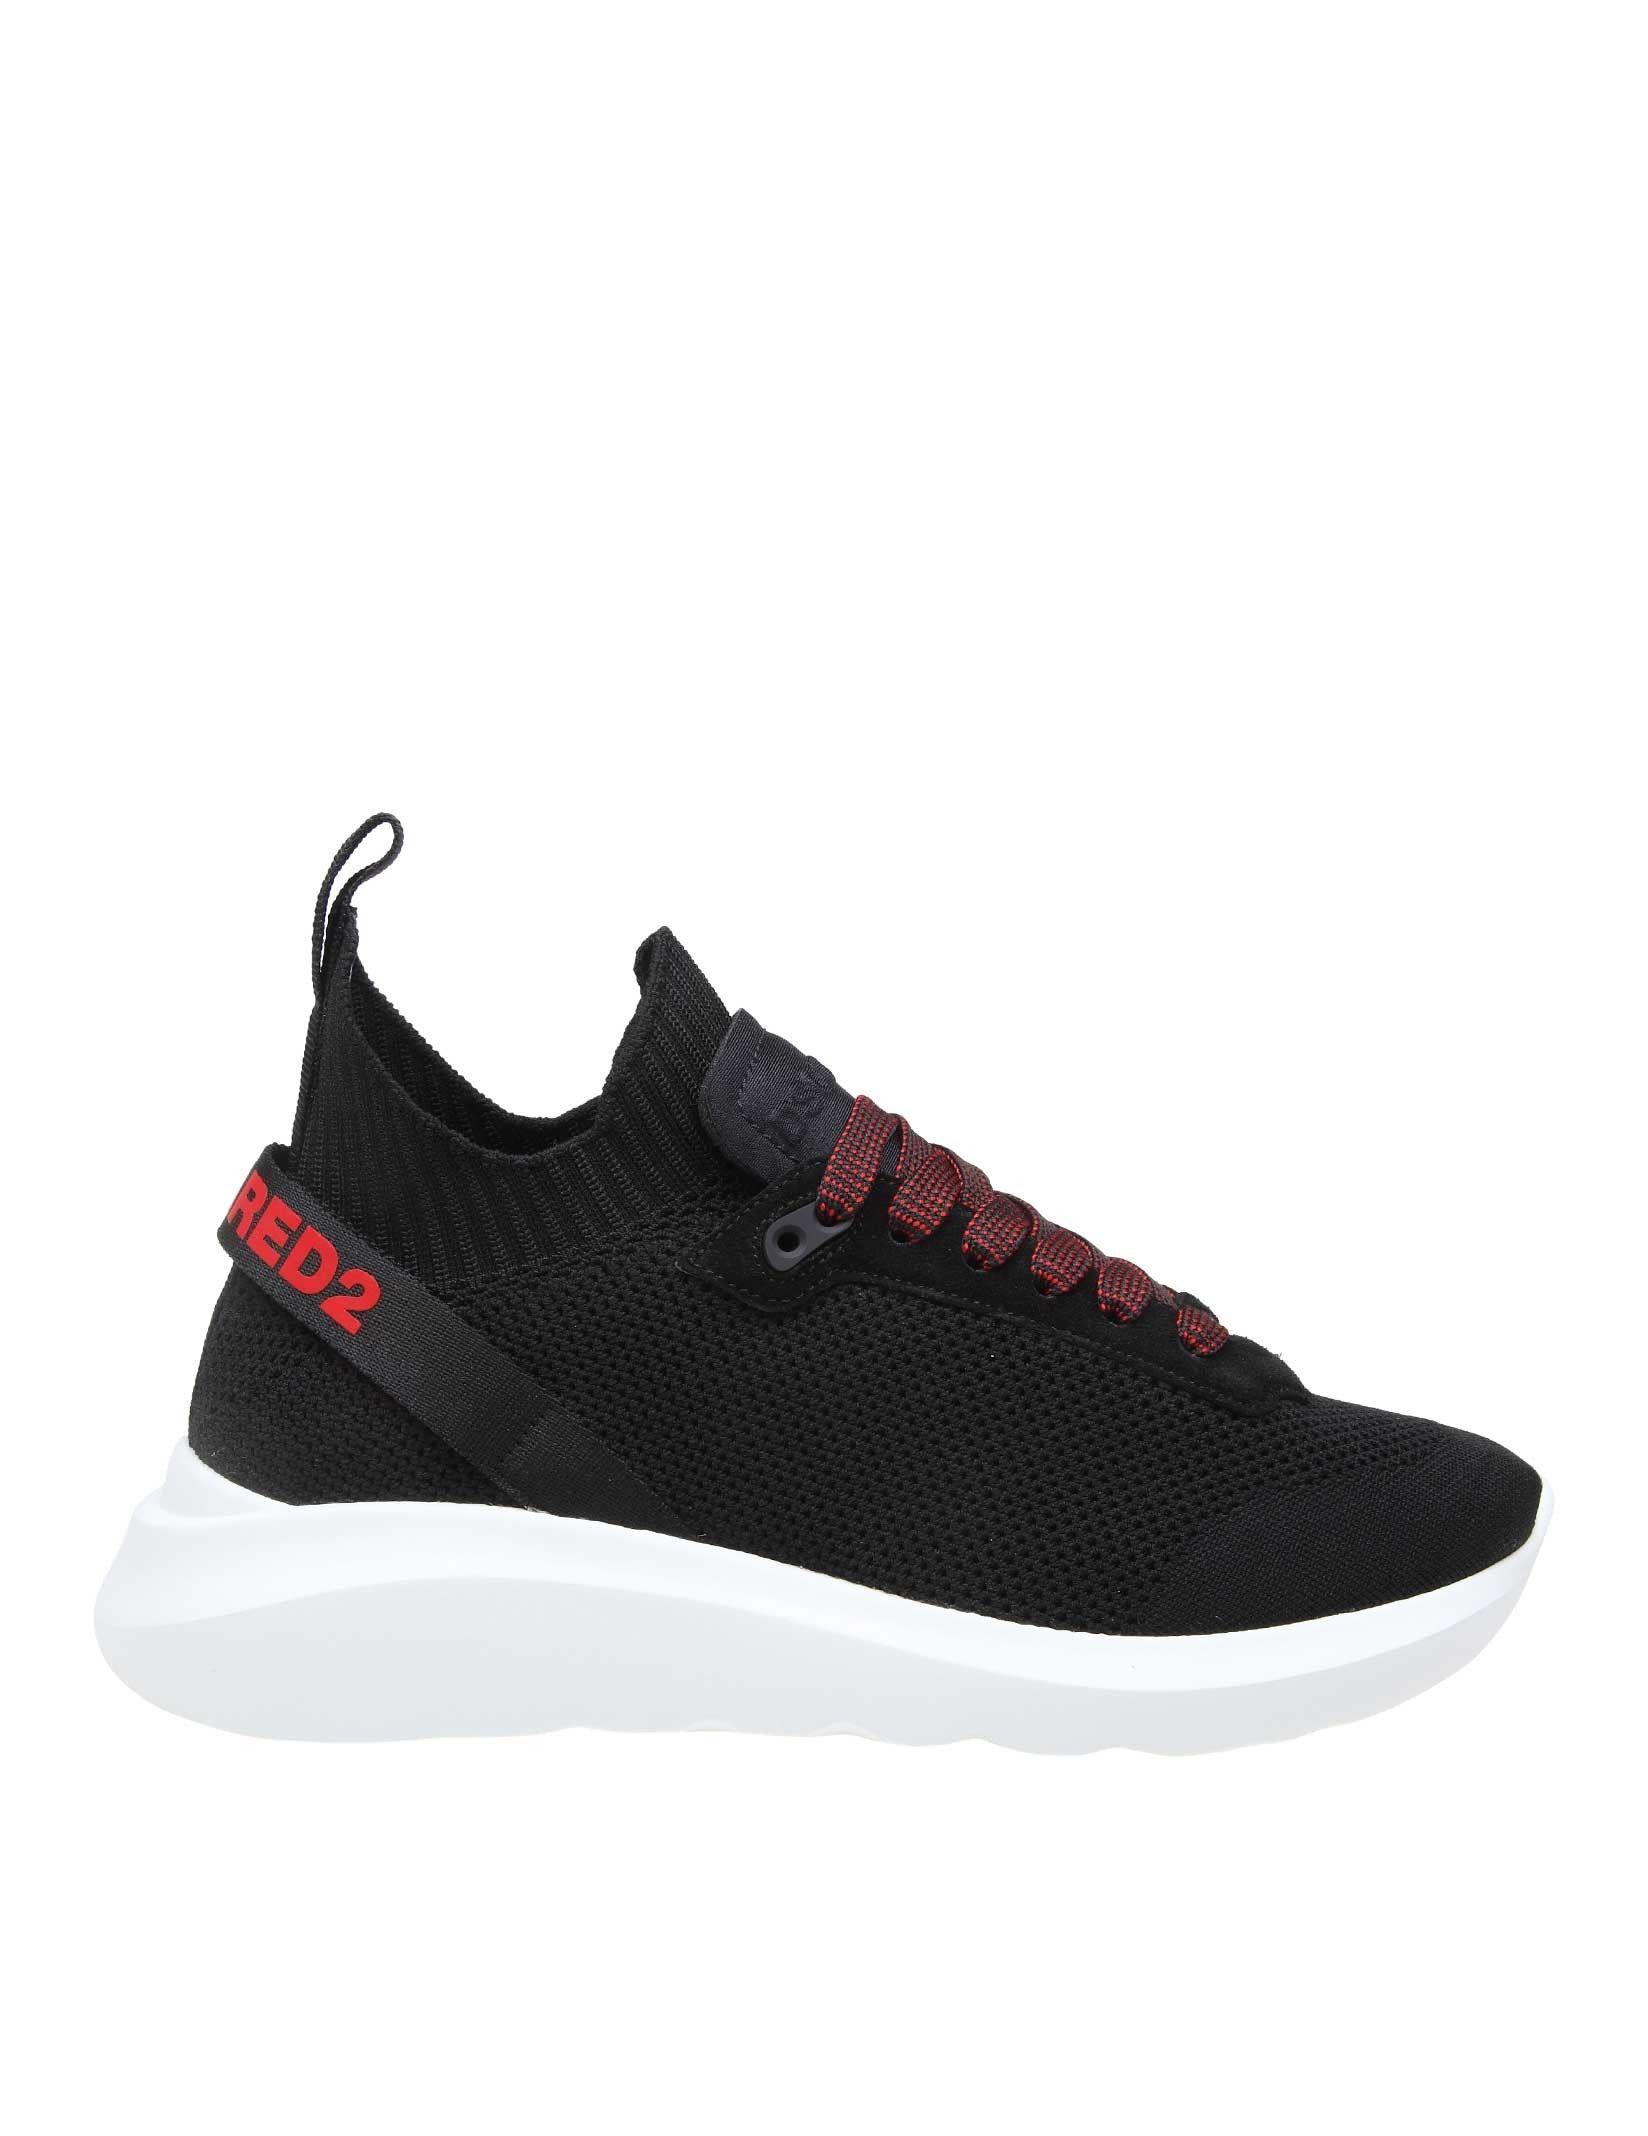 DSquared² Suede Black Polyester Sneakers for Men - Save 35% - Lyst